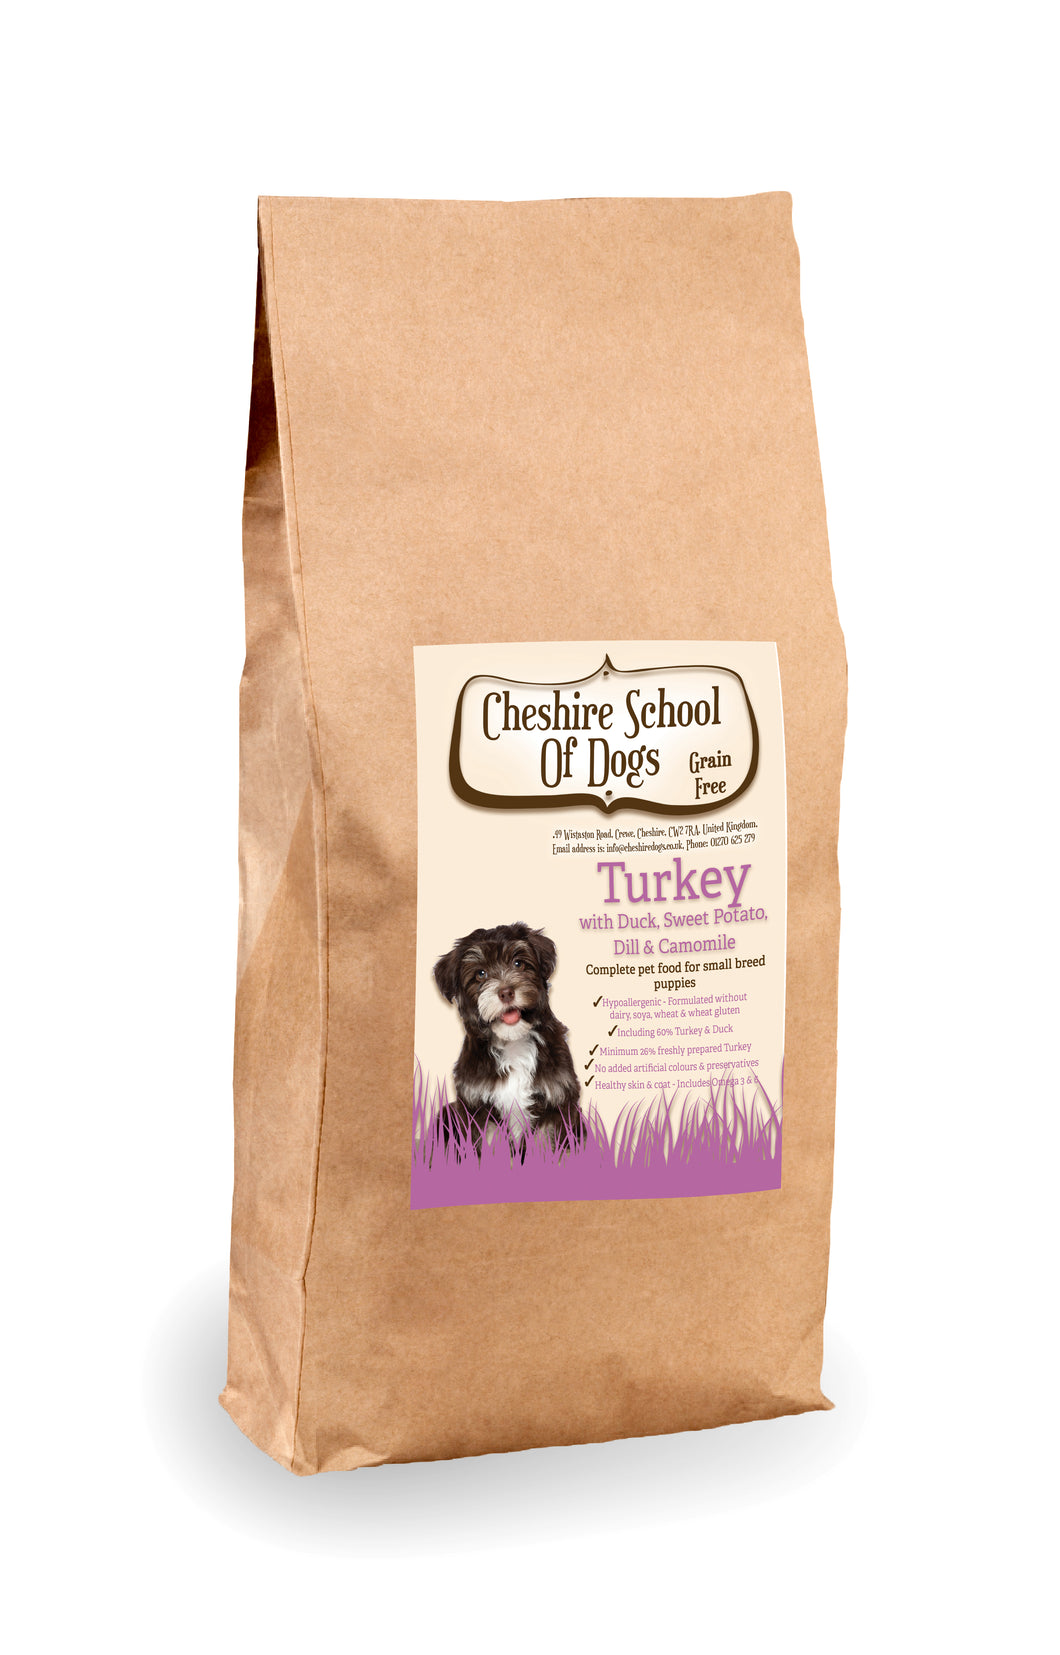 Grain Free - Turkey with Duck, Sweet Potato, hill and Chamomile - Complete PUPPY food for small breeds